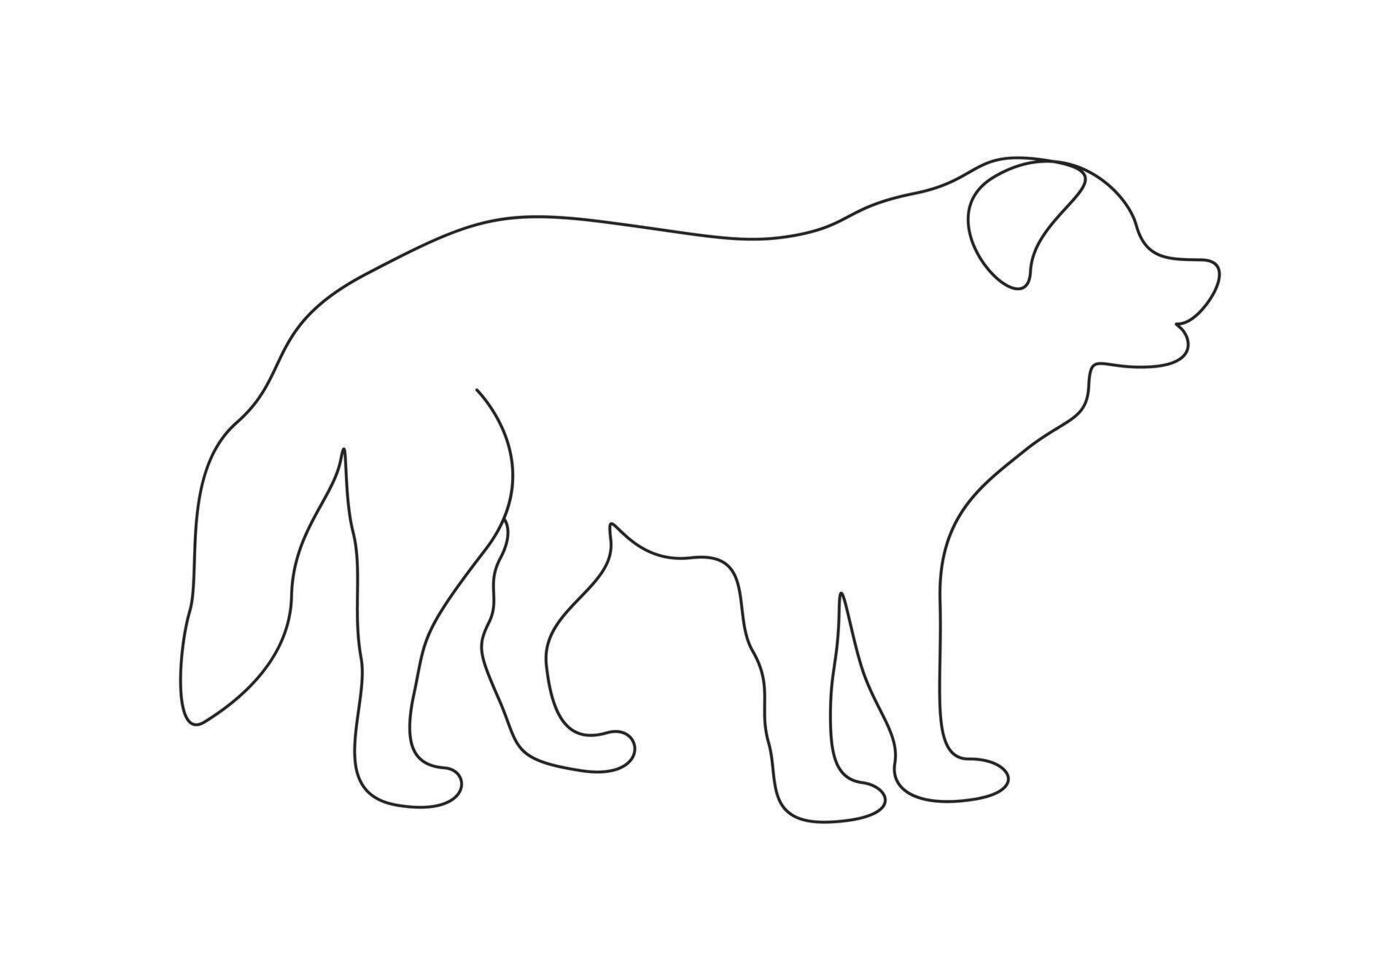 Continuous single line drawing of cute dog premium illustration vector